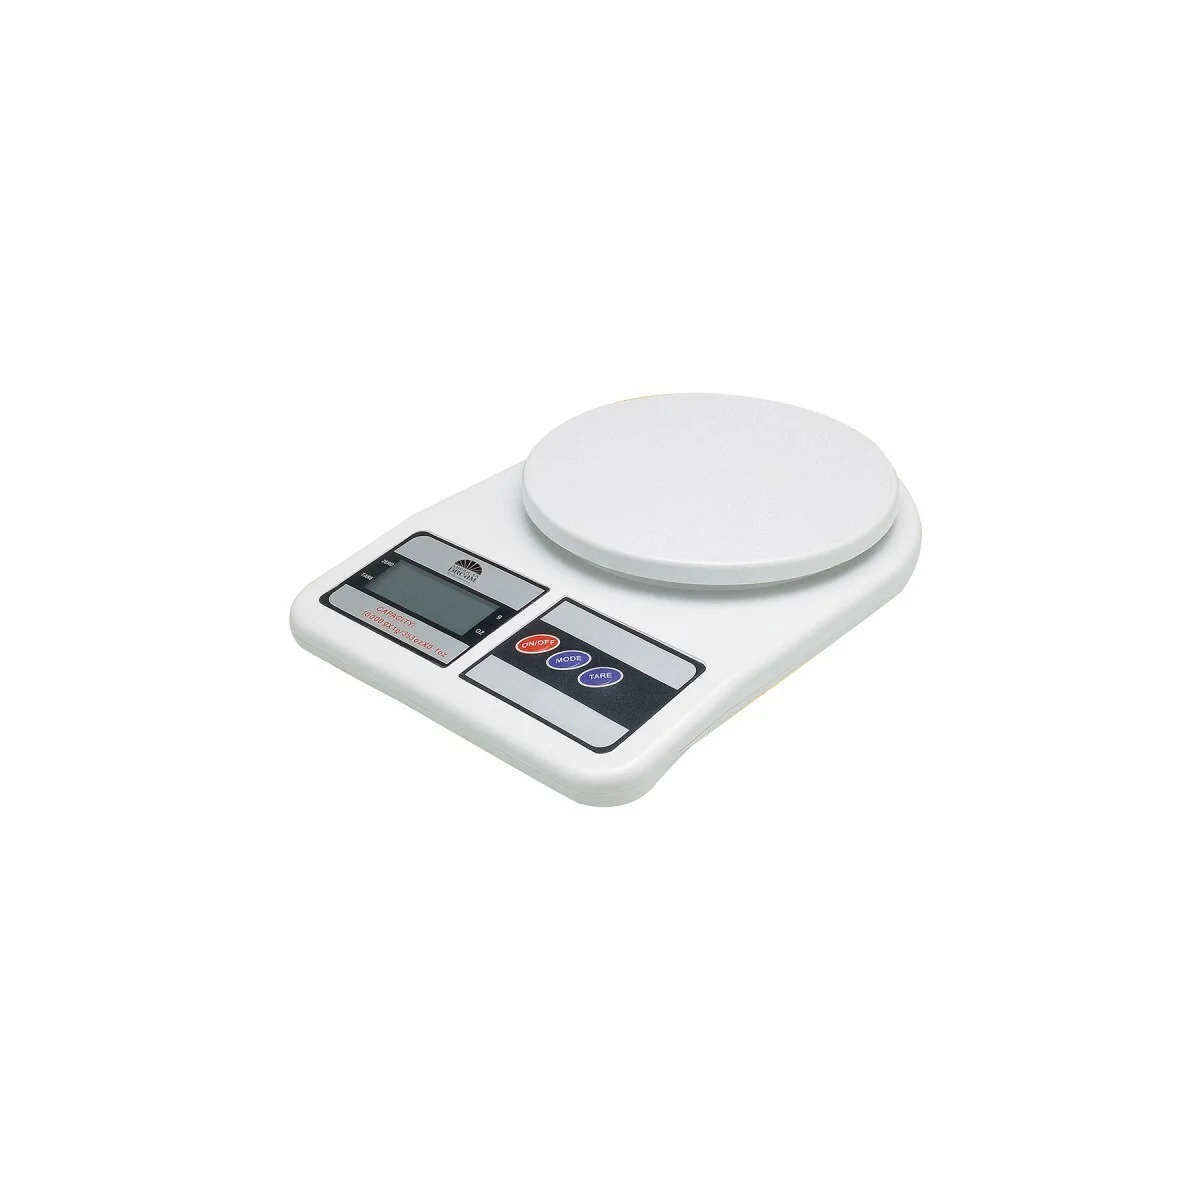 Scales Digital Food Soap Making Weigh Scale Stainless Steel Auto